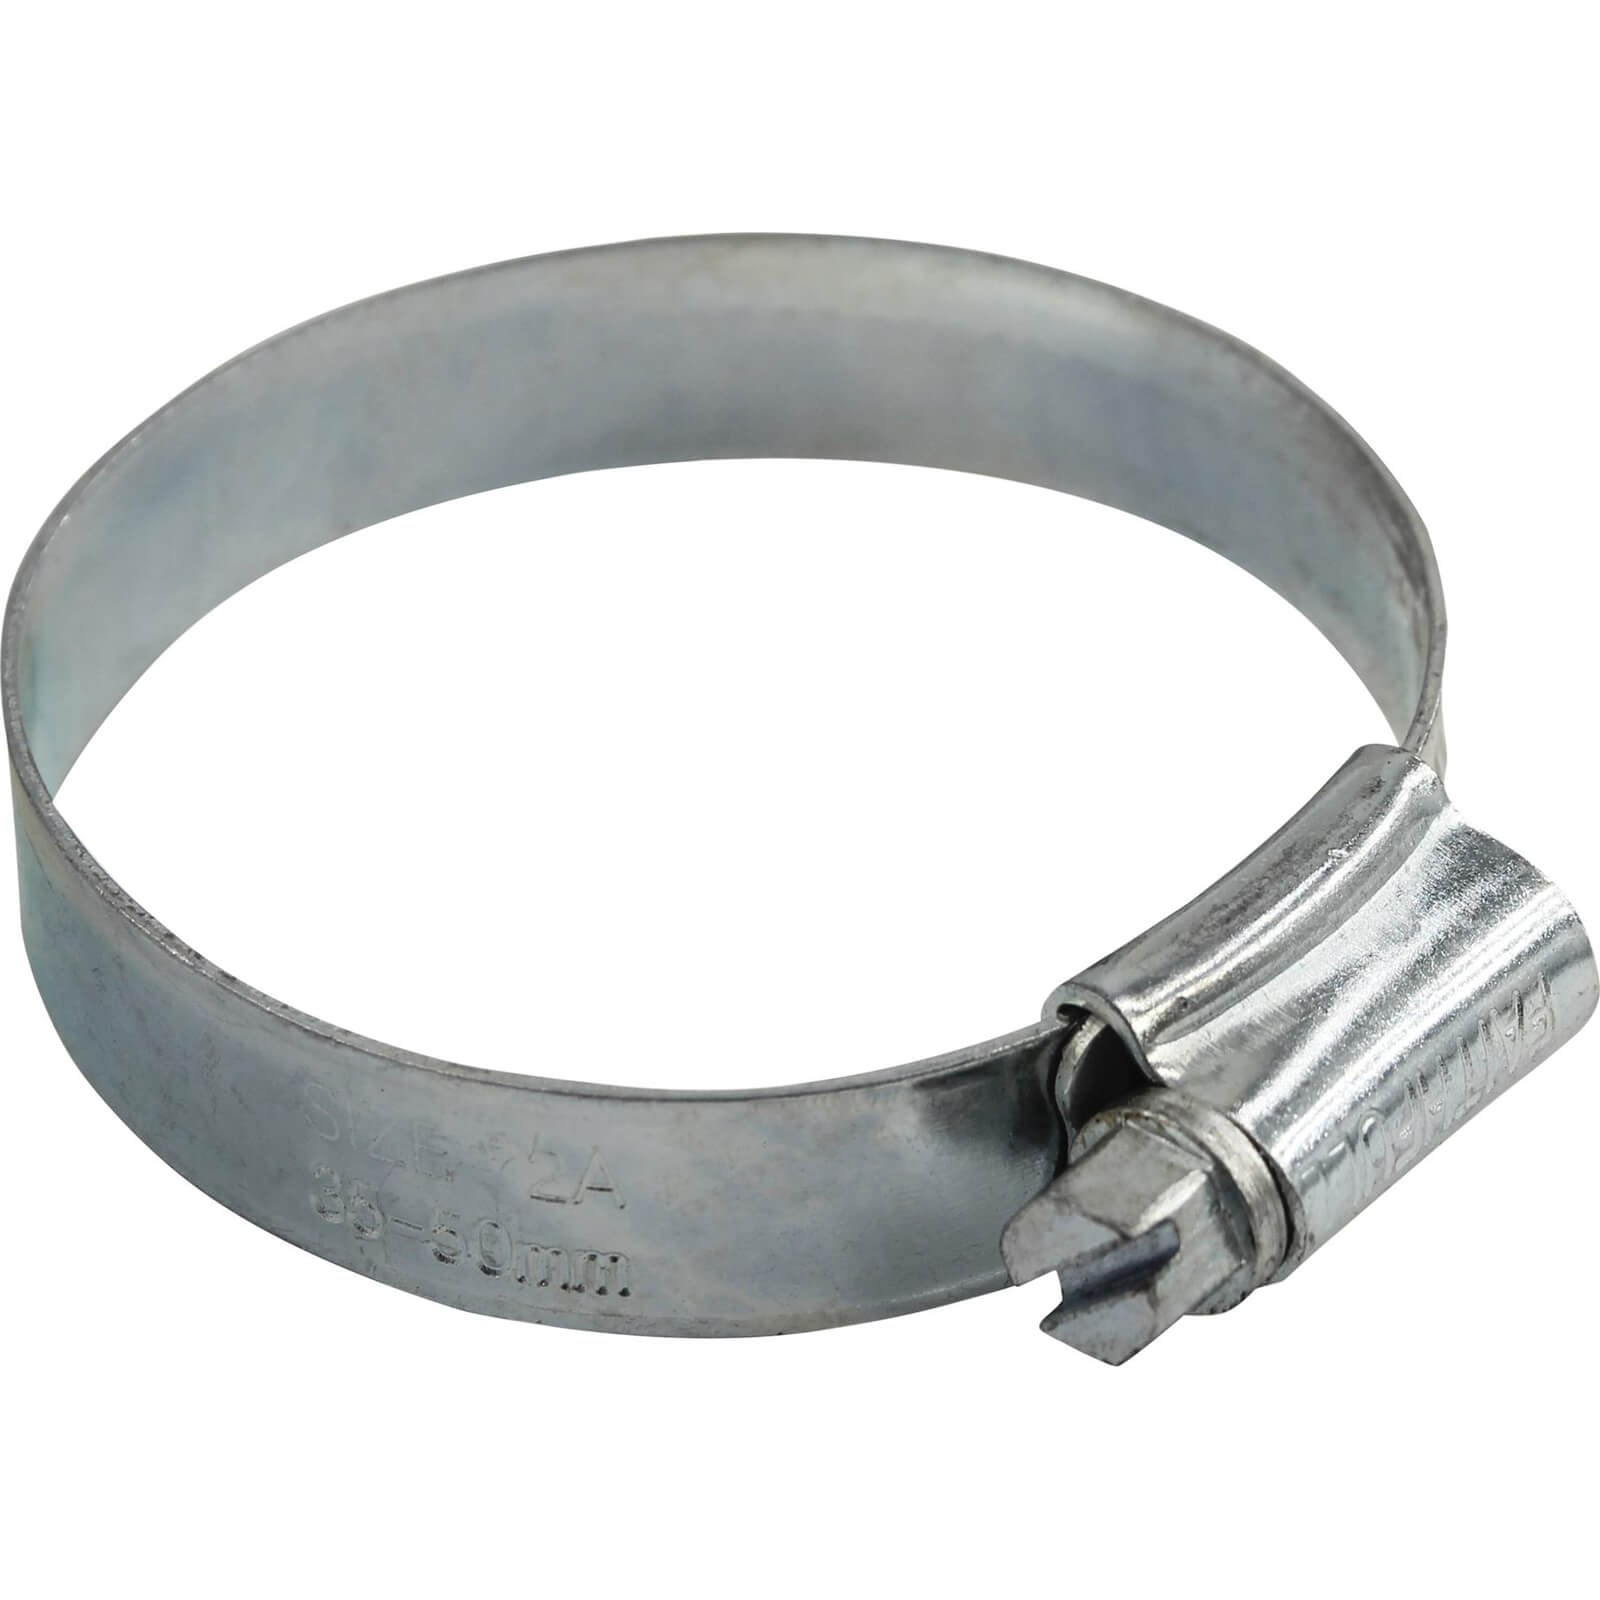 Image of Faithfull Zinc Plated Hose Clips 35mm - 50mm Pack of 1